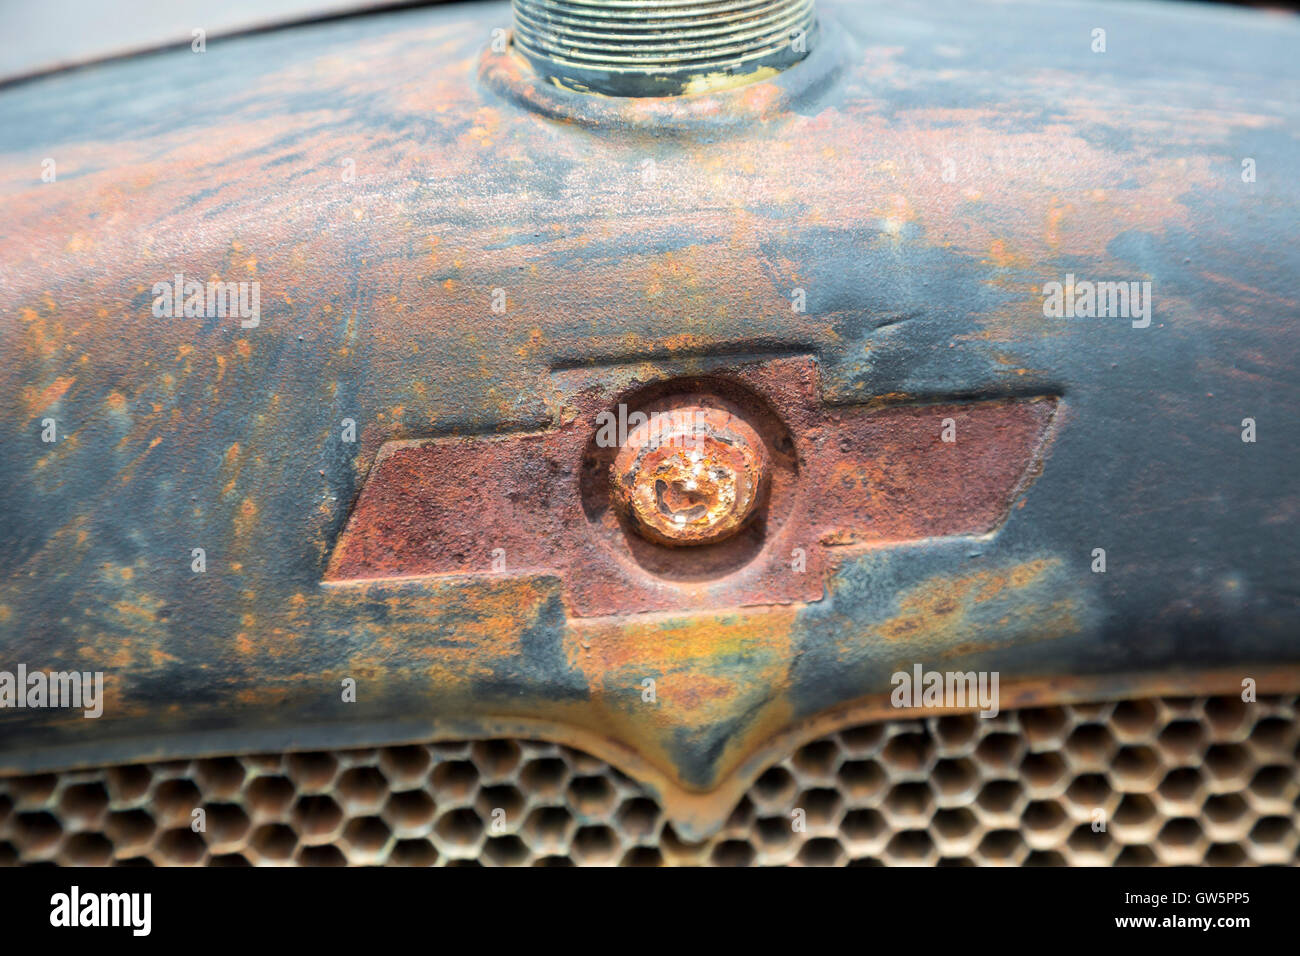 Las Vegas, Nevada - The rusted 'bowtie' emblem on an early Chevrolet truck at the Clark County Museum. Stock Photo